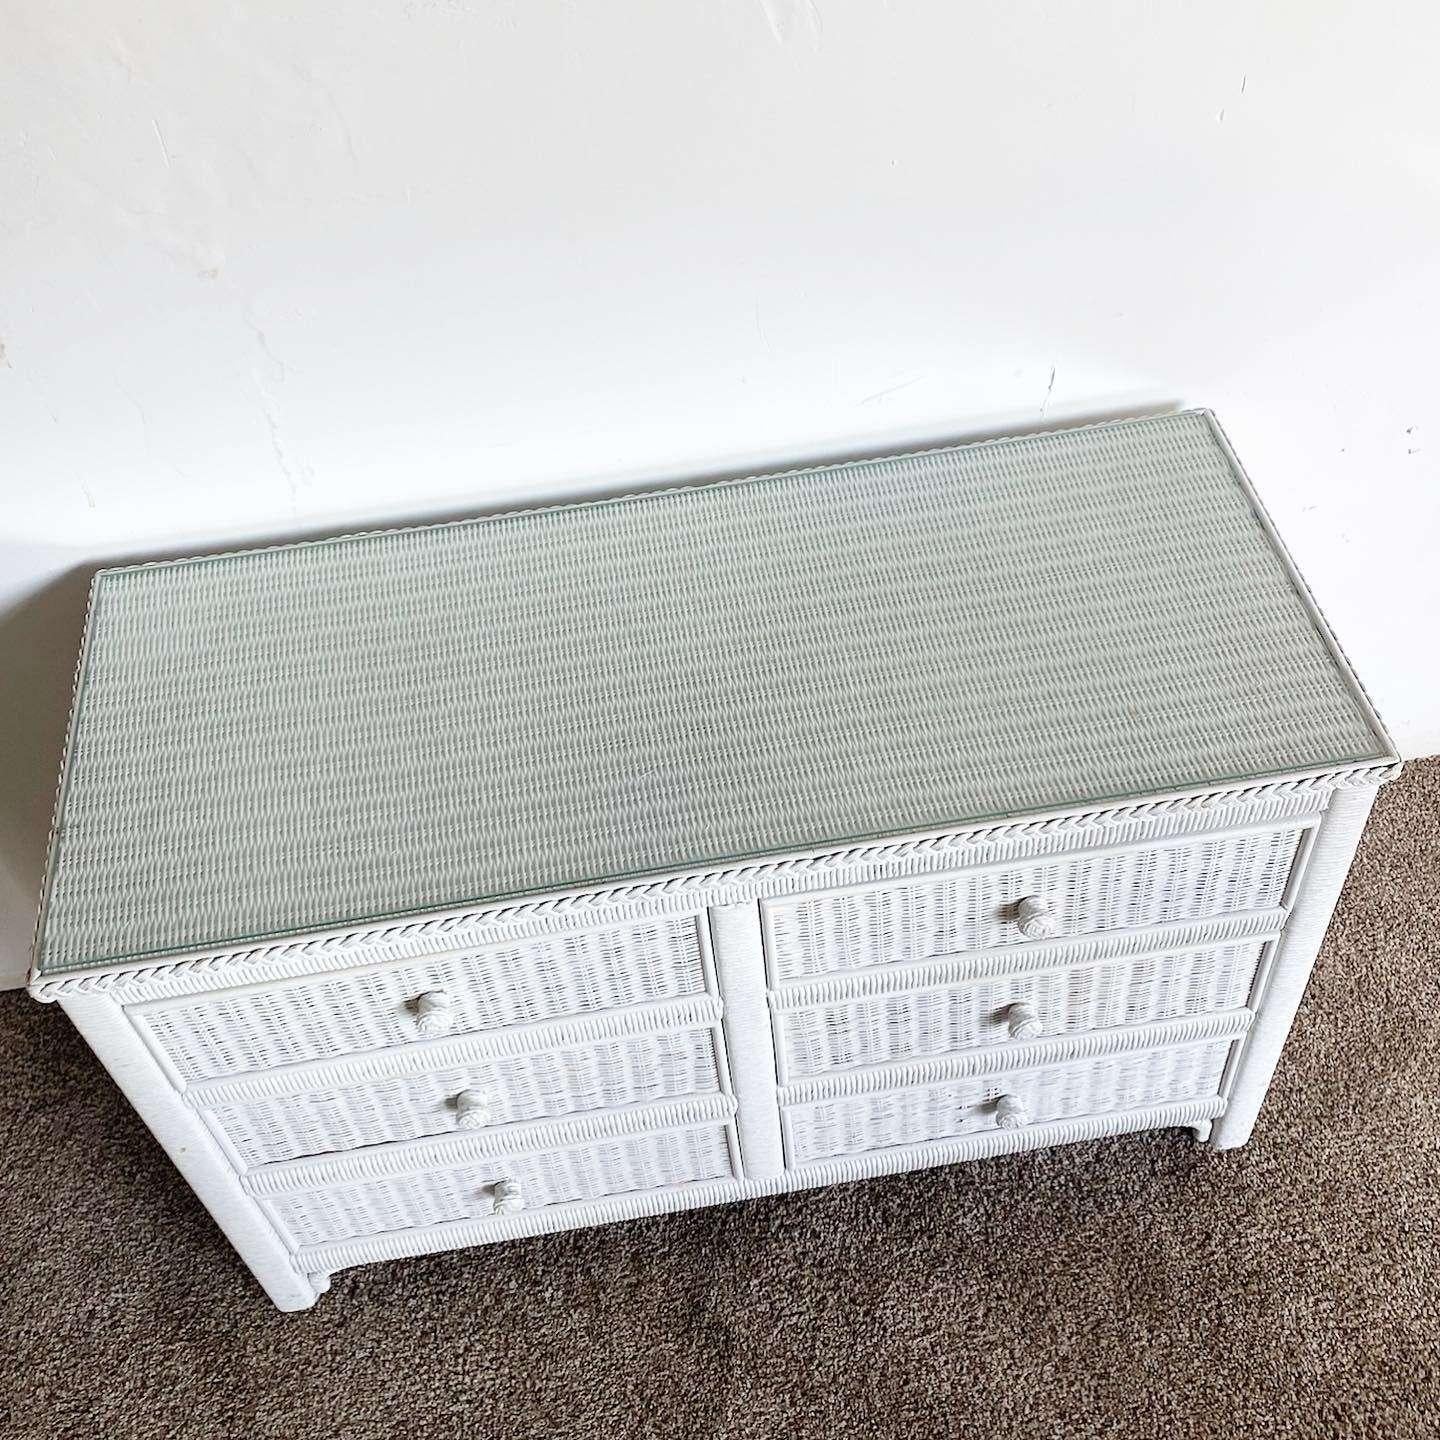 Amazing vintage bohemian wicker and rattan dresser. Features a white painted finish with a glass top and 6 spacious drawers.
